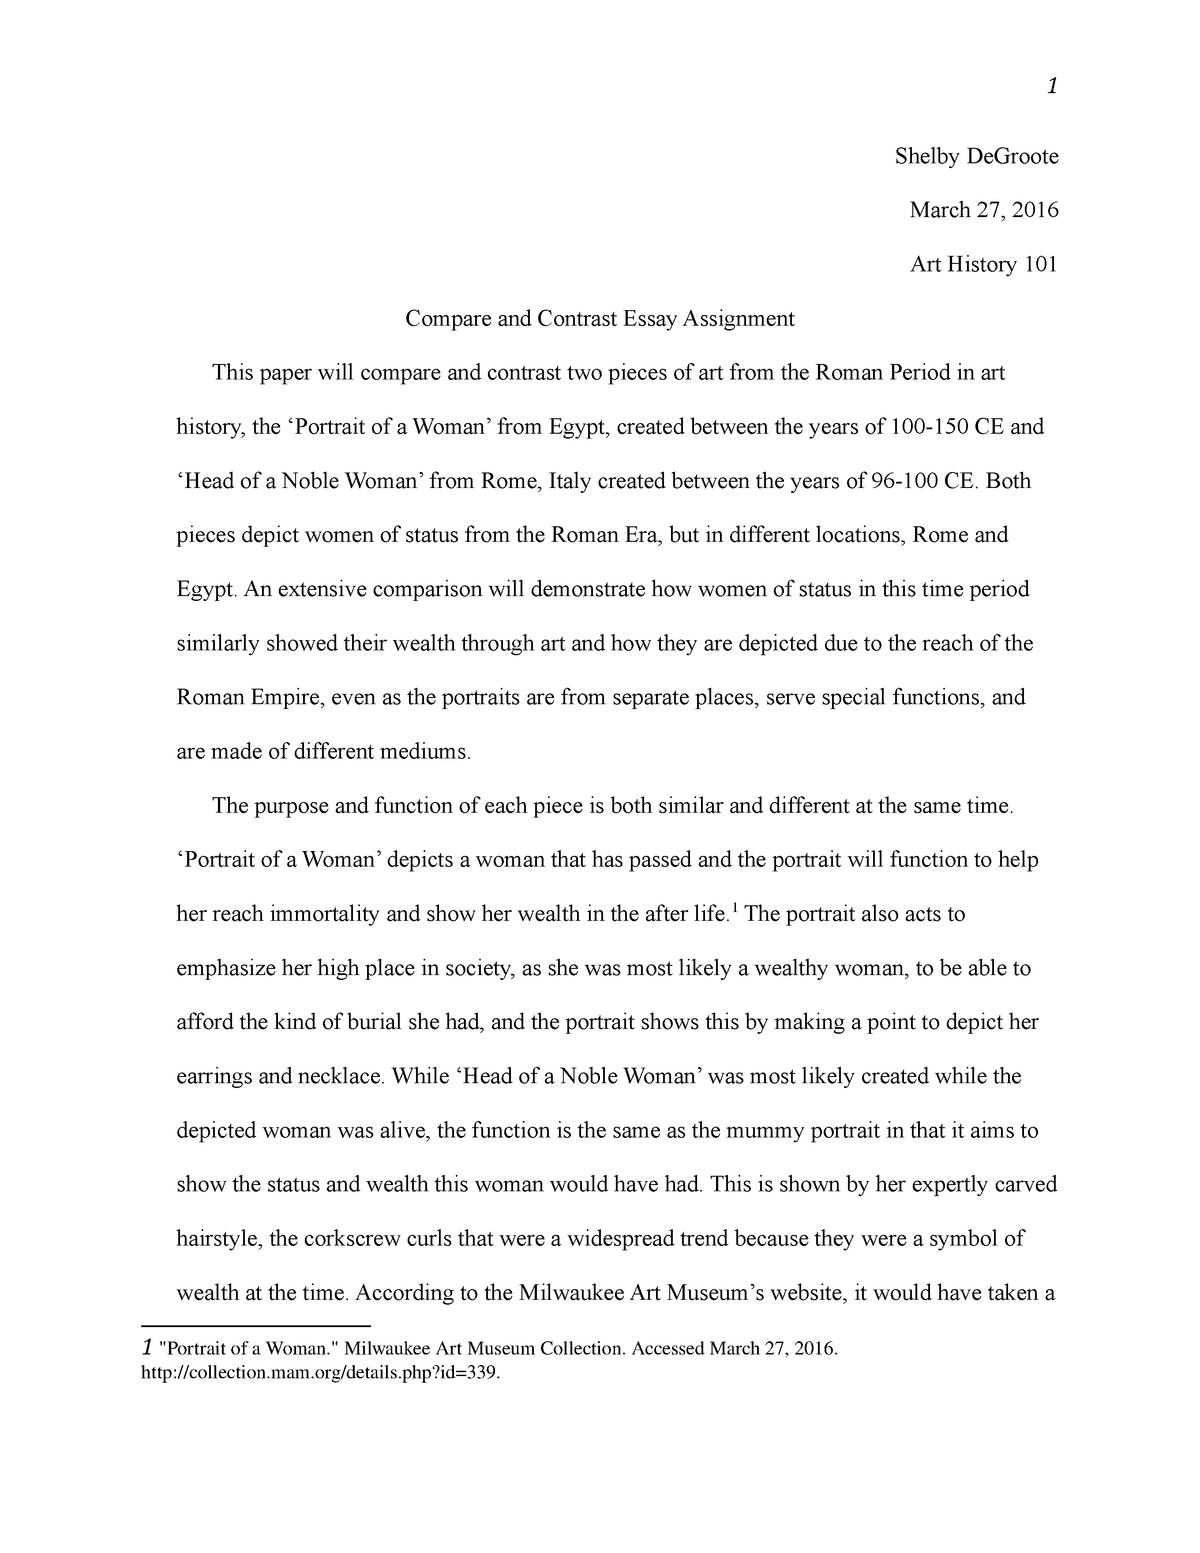 art history compare and contrast essay examples